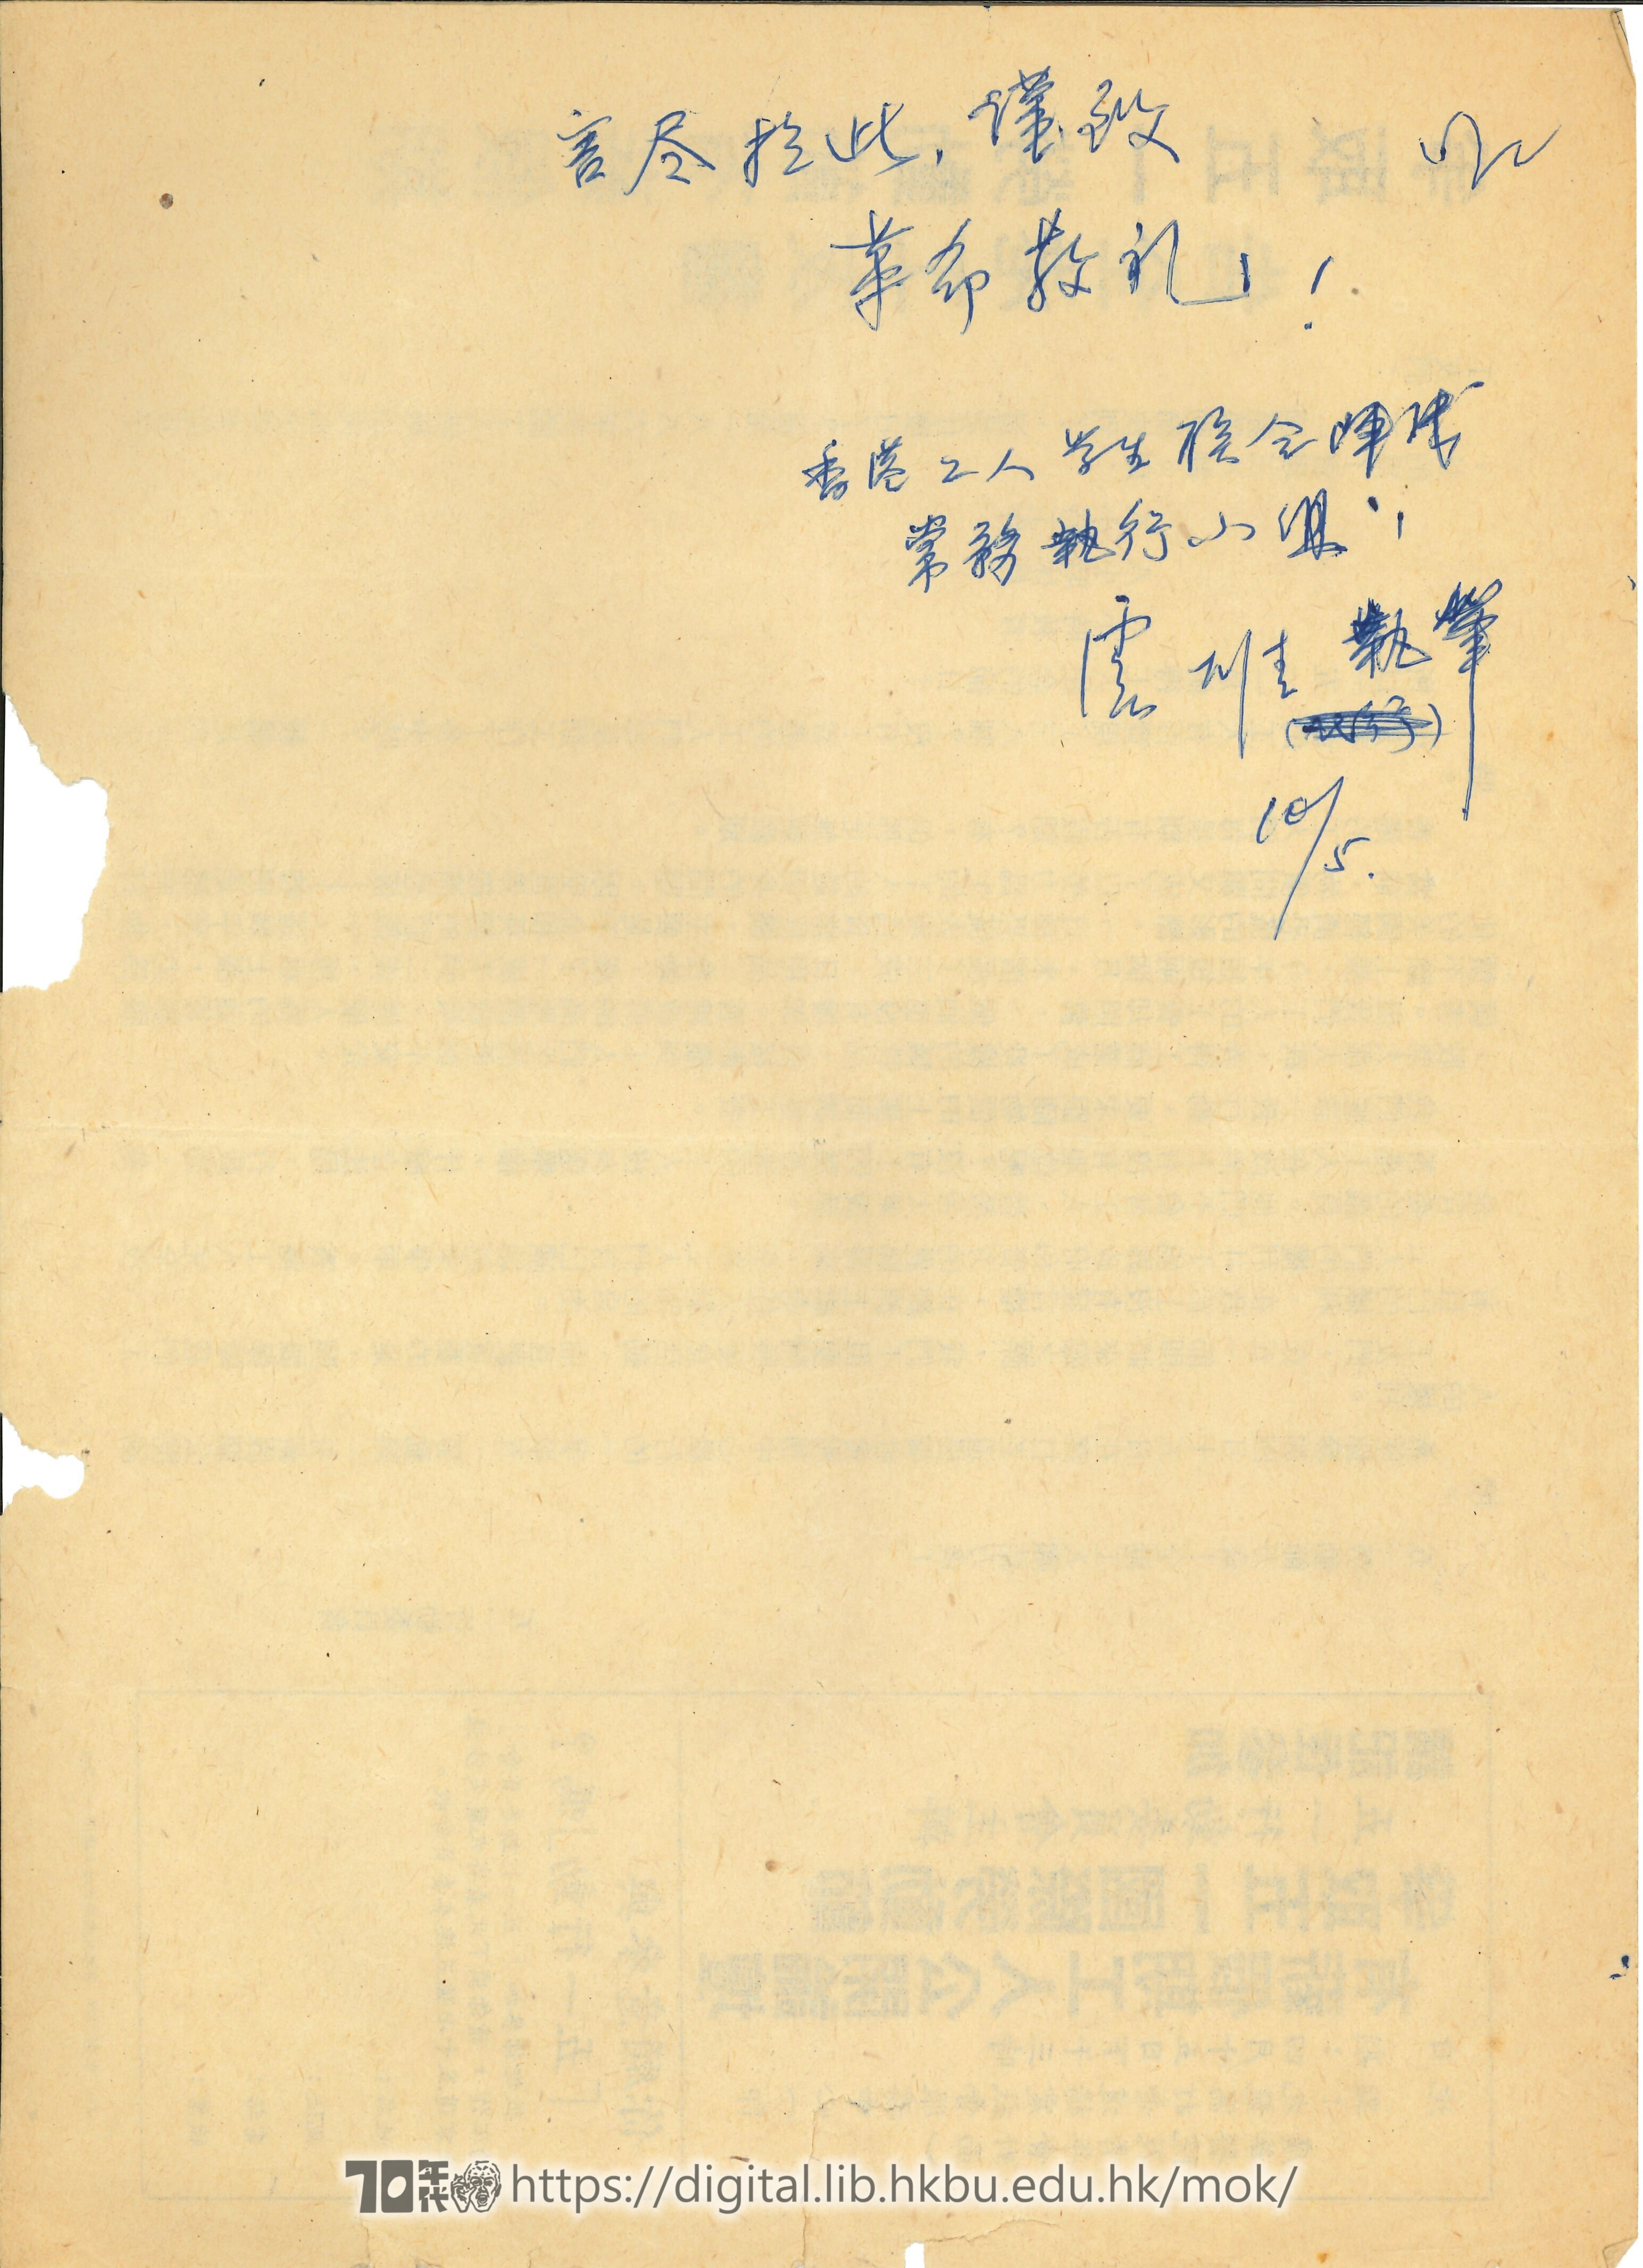   Letter signed by United Front to Ng Chung Yin 香港工人學生聯會陣線常務執行小組 